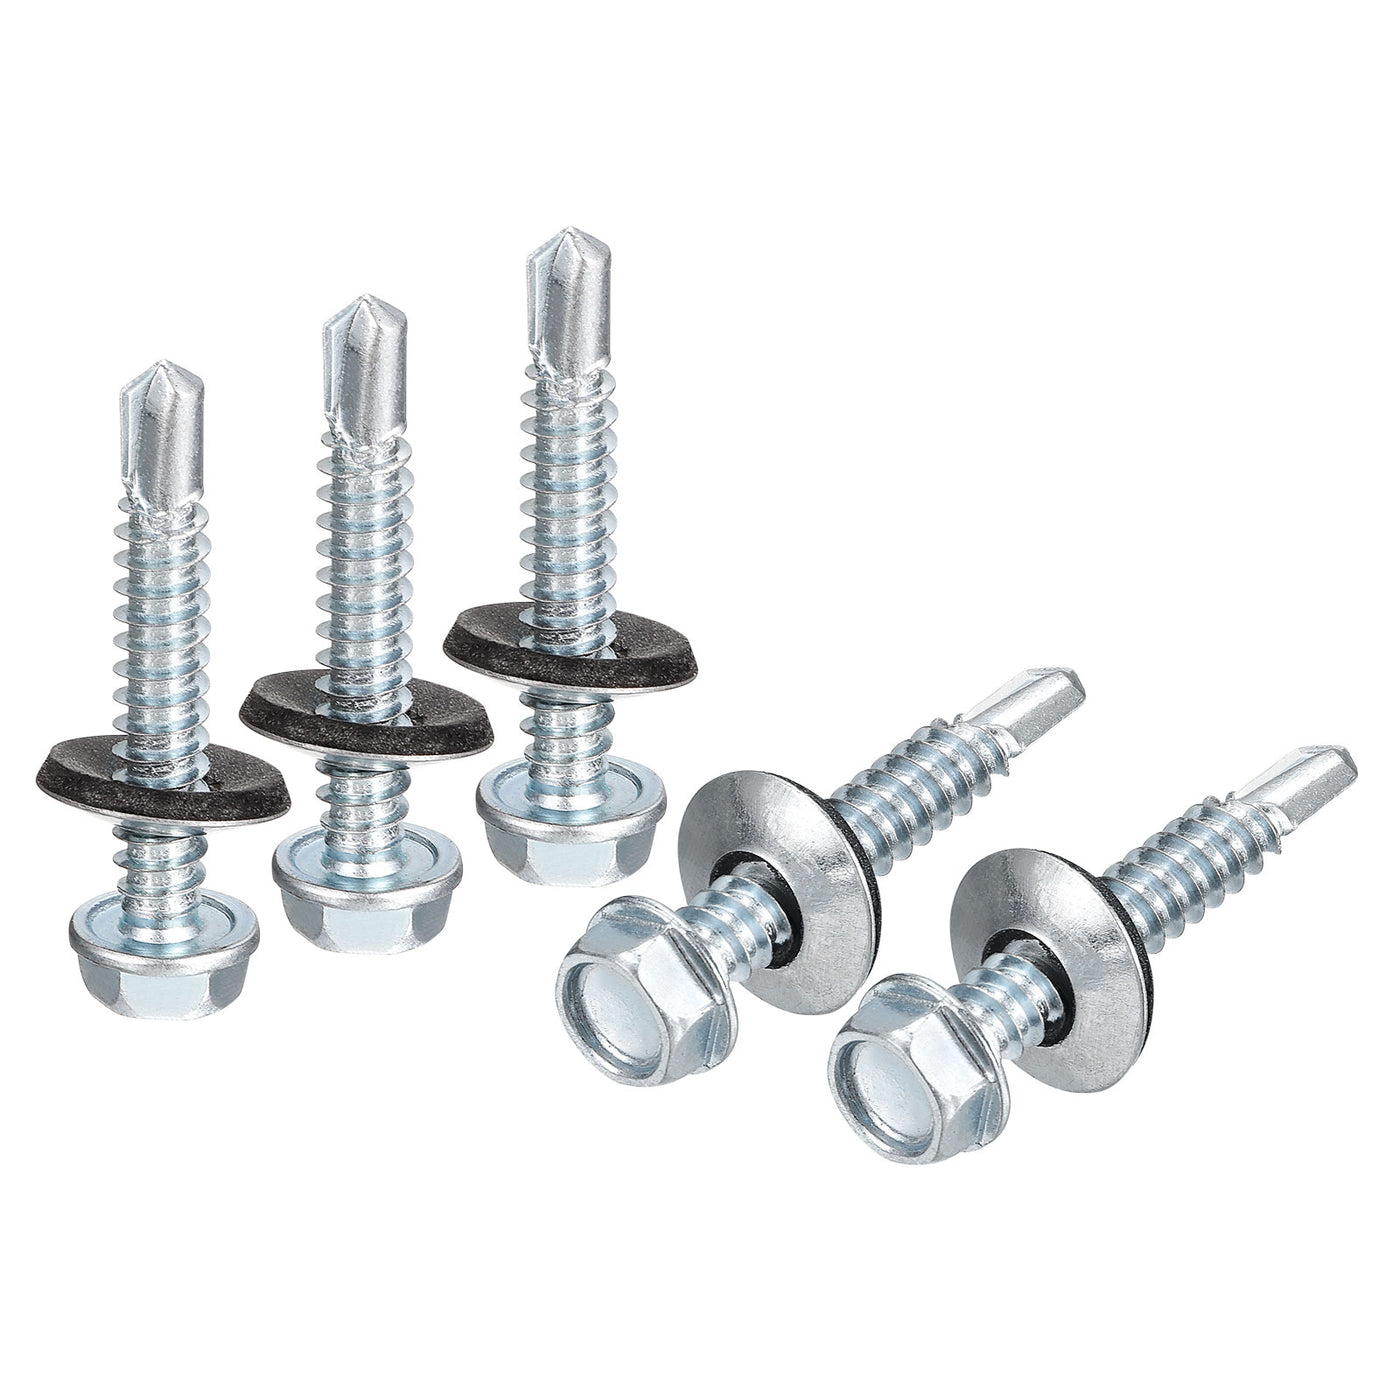 uxcell Uxcell #14 x 1-1/2" Self Drilling Screws, 100pcs Roofing Screws with EPDM Washer